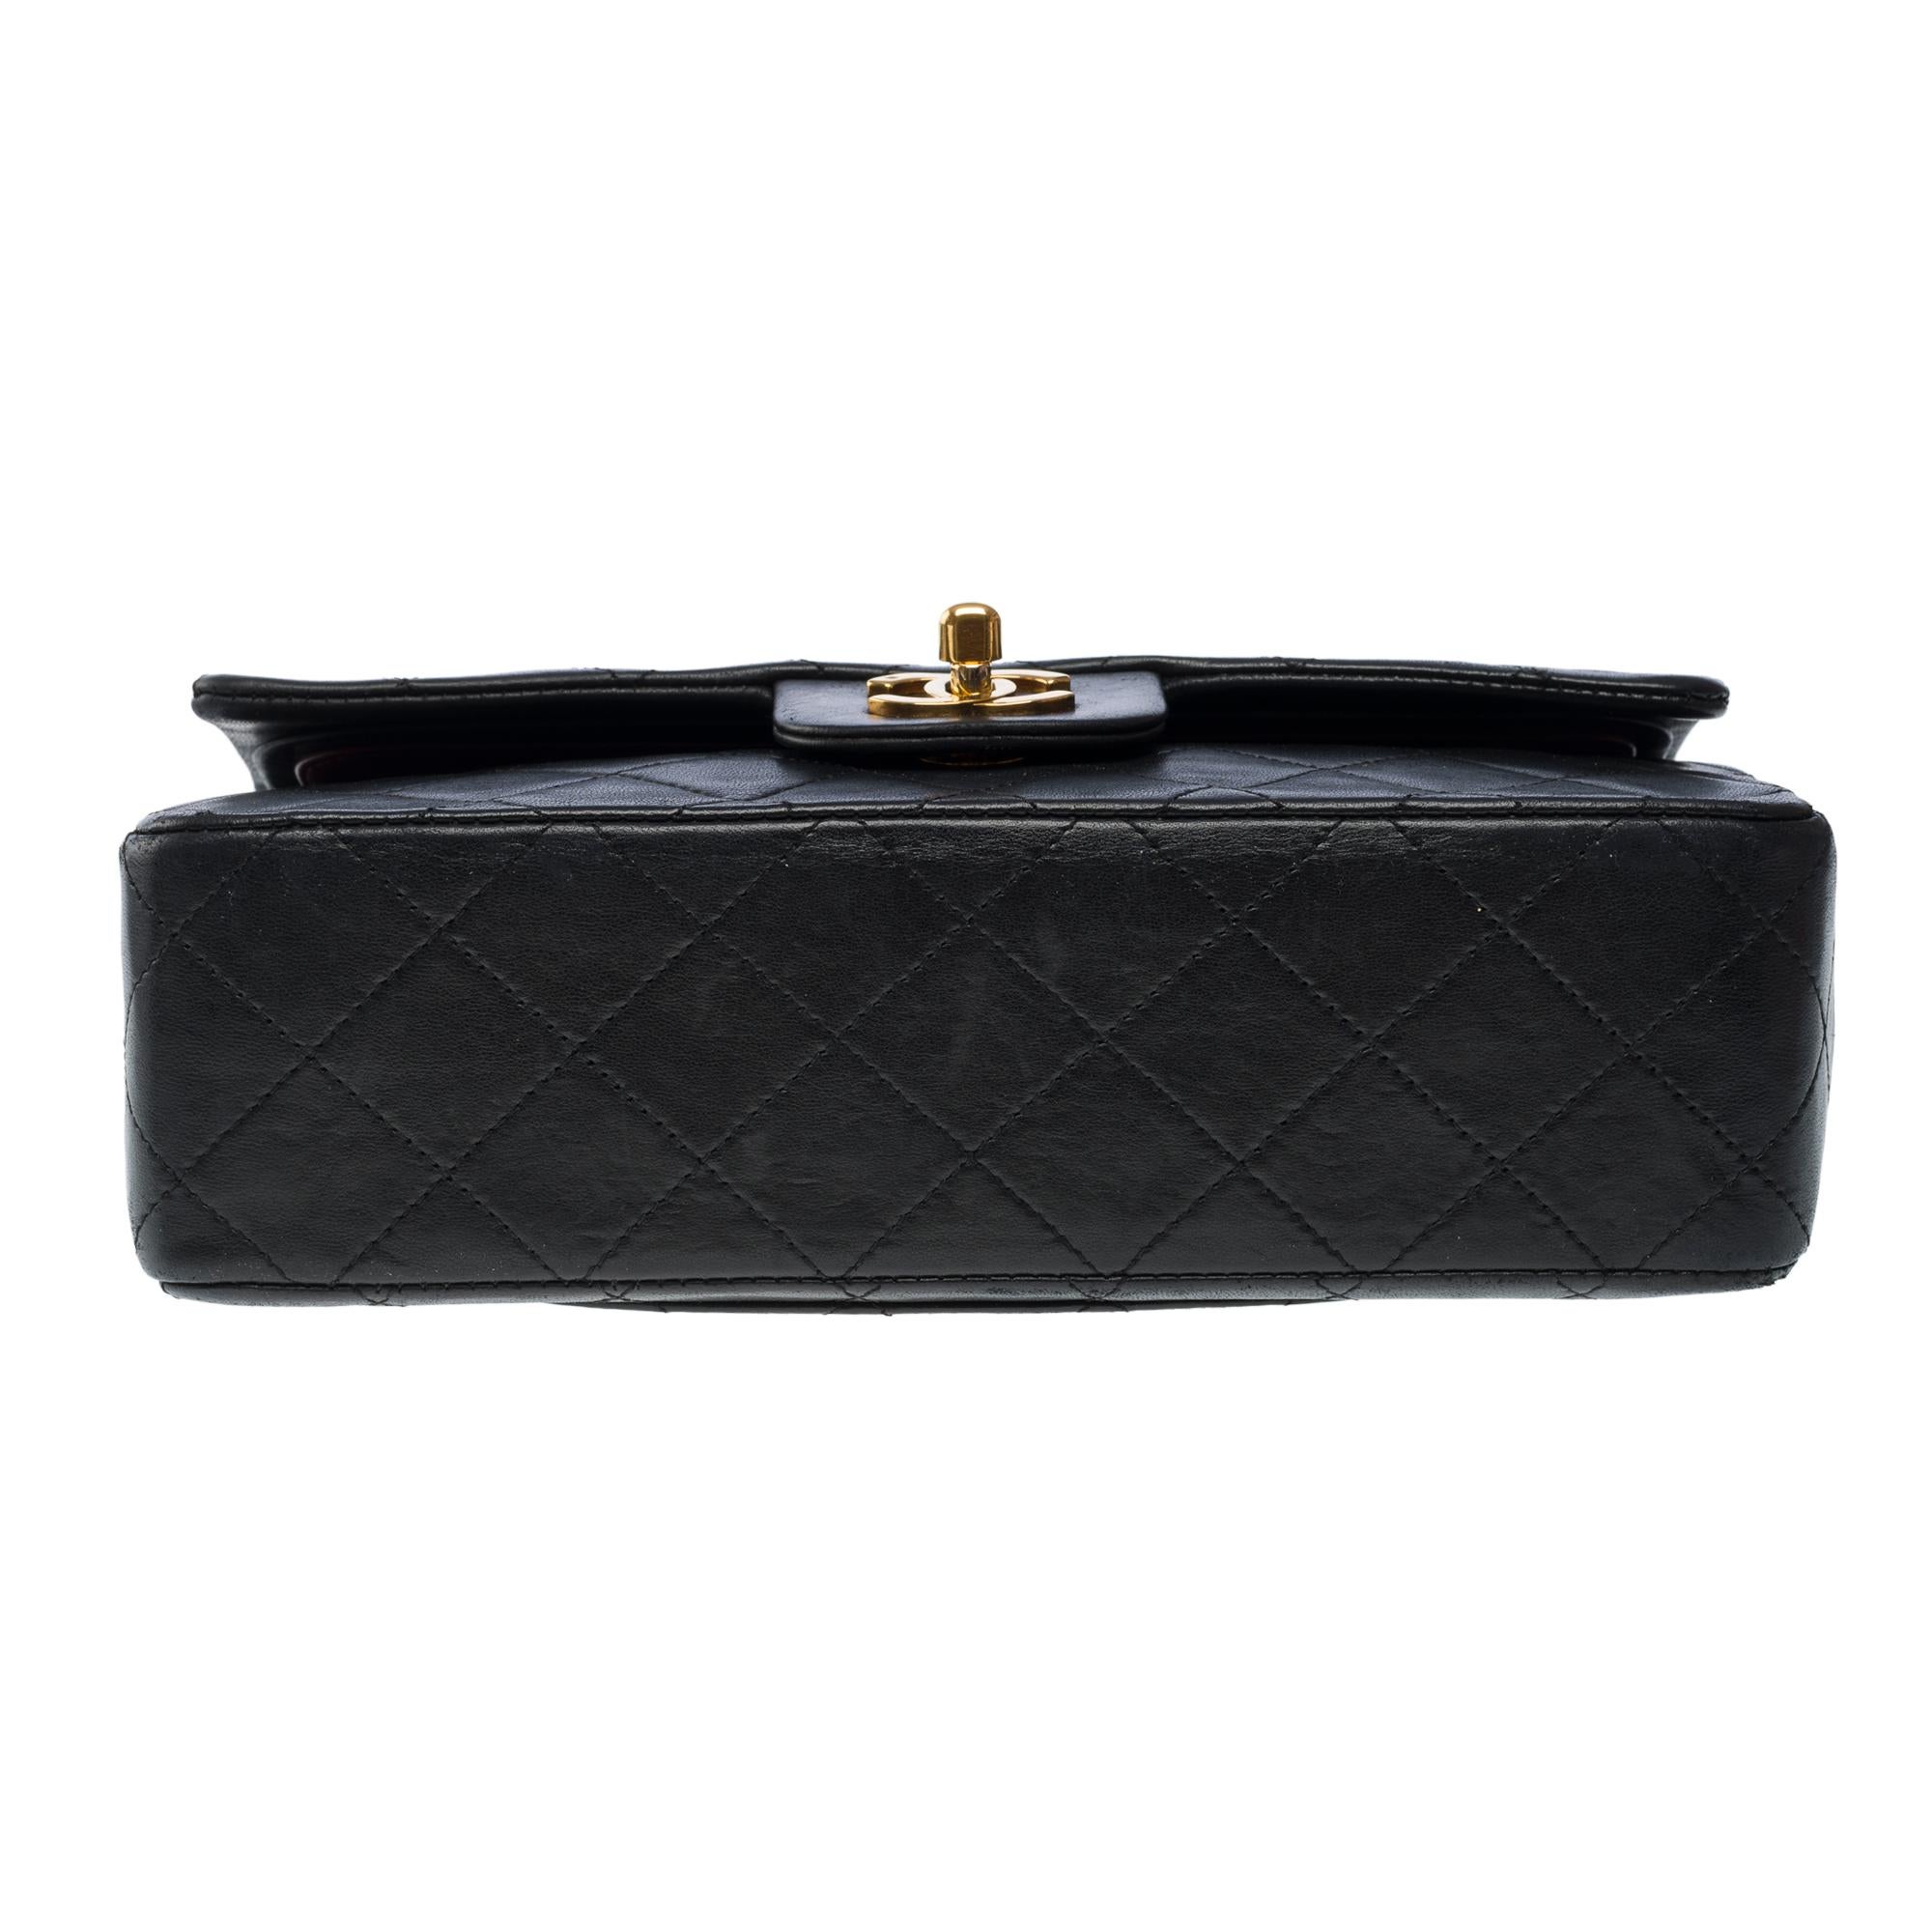 Chanel Timeless 23cm double flap shoulder bag in black quilted lambskin, GHW 6